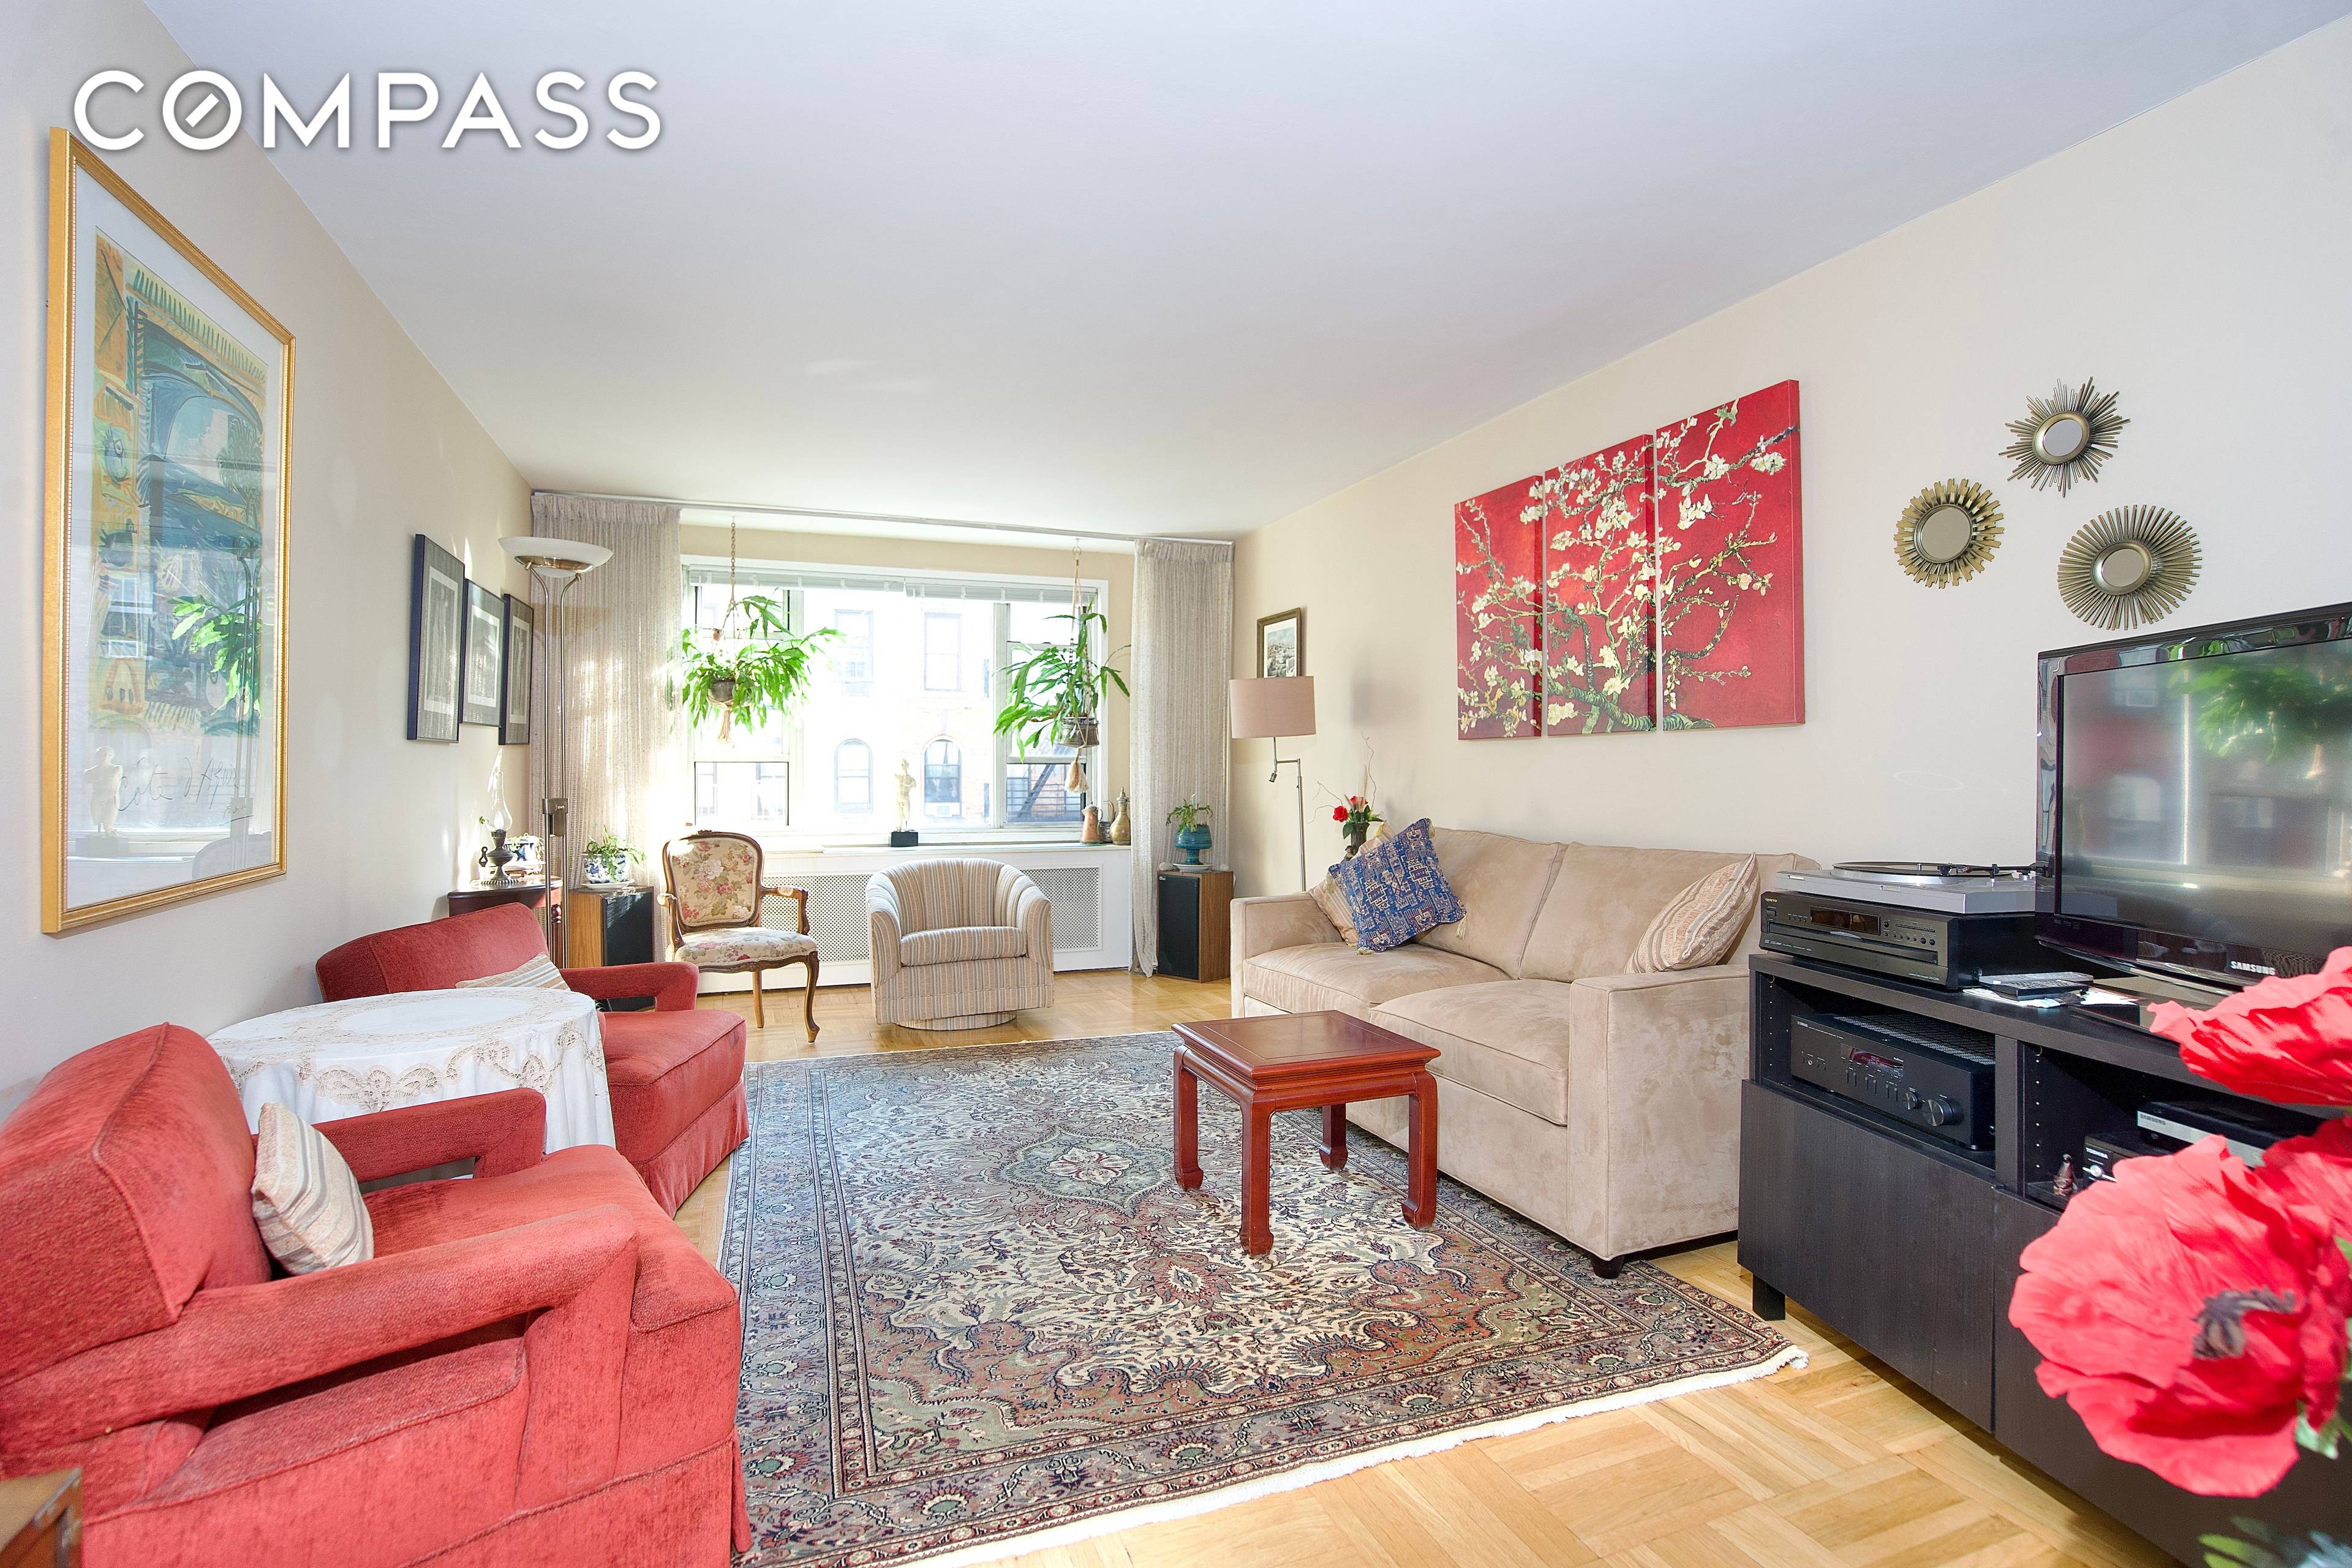 Welcome to this extra large and sunny corner one bedroom home with both southern and western exposures on leafy East 77th Street on the Upper East Side.